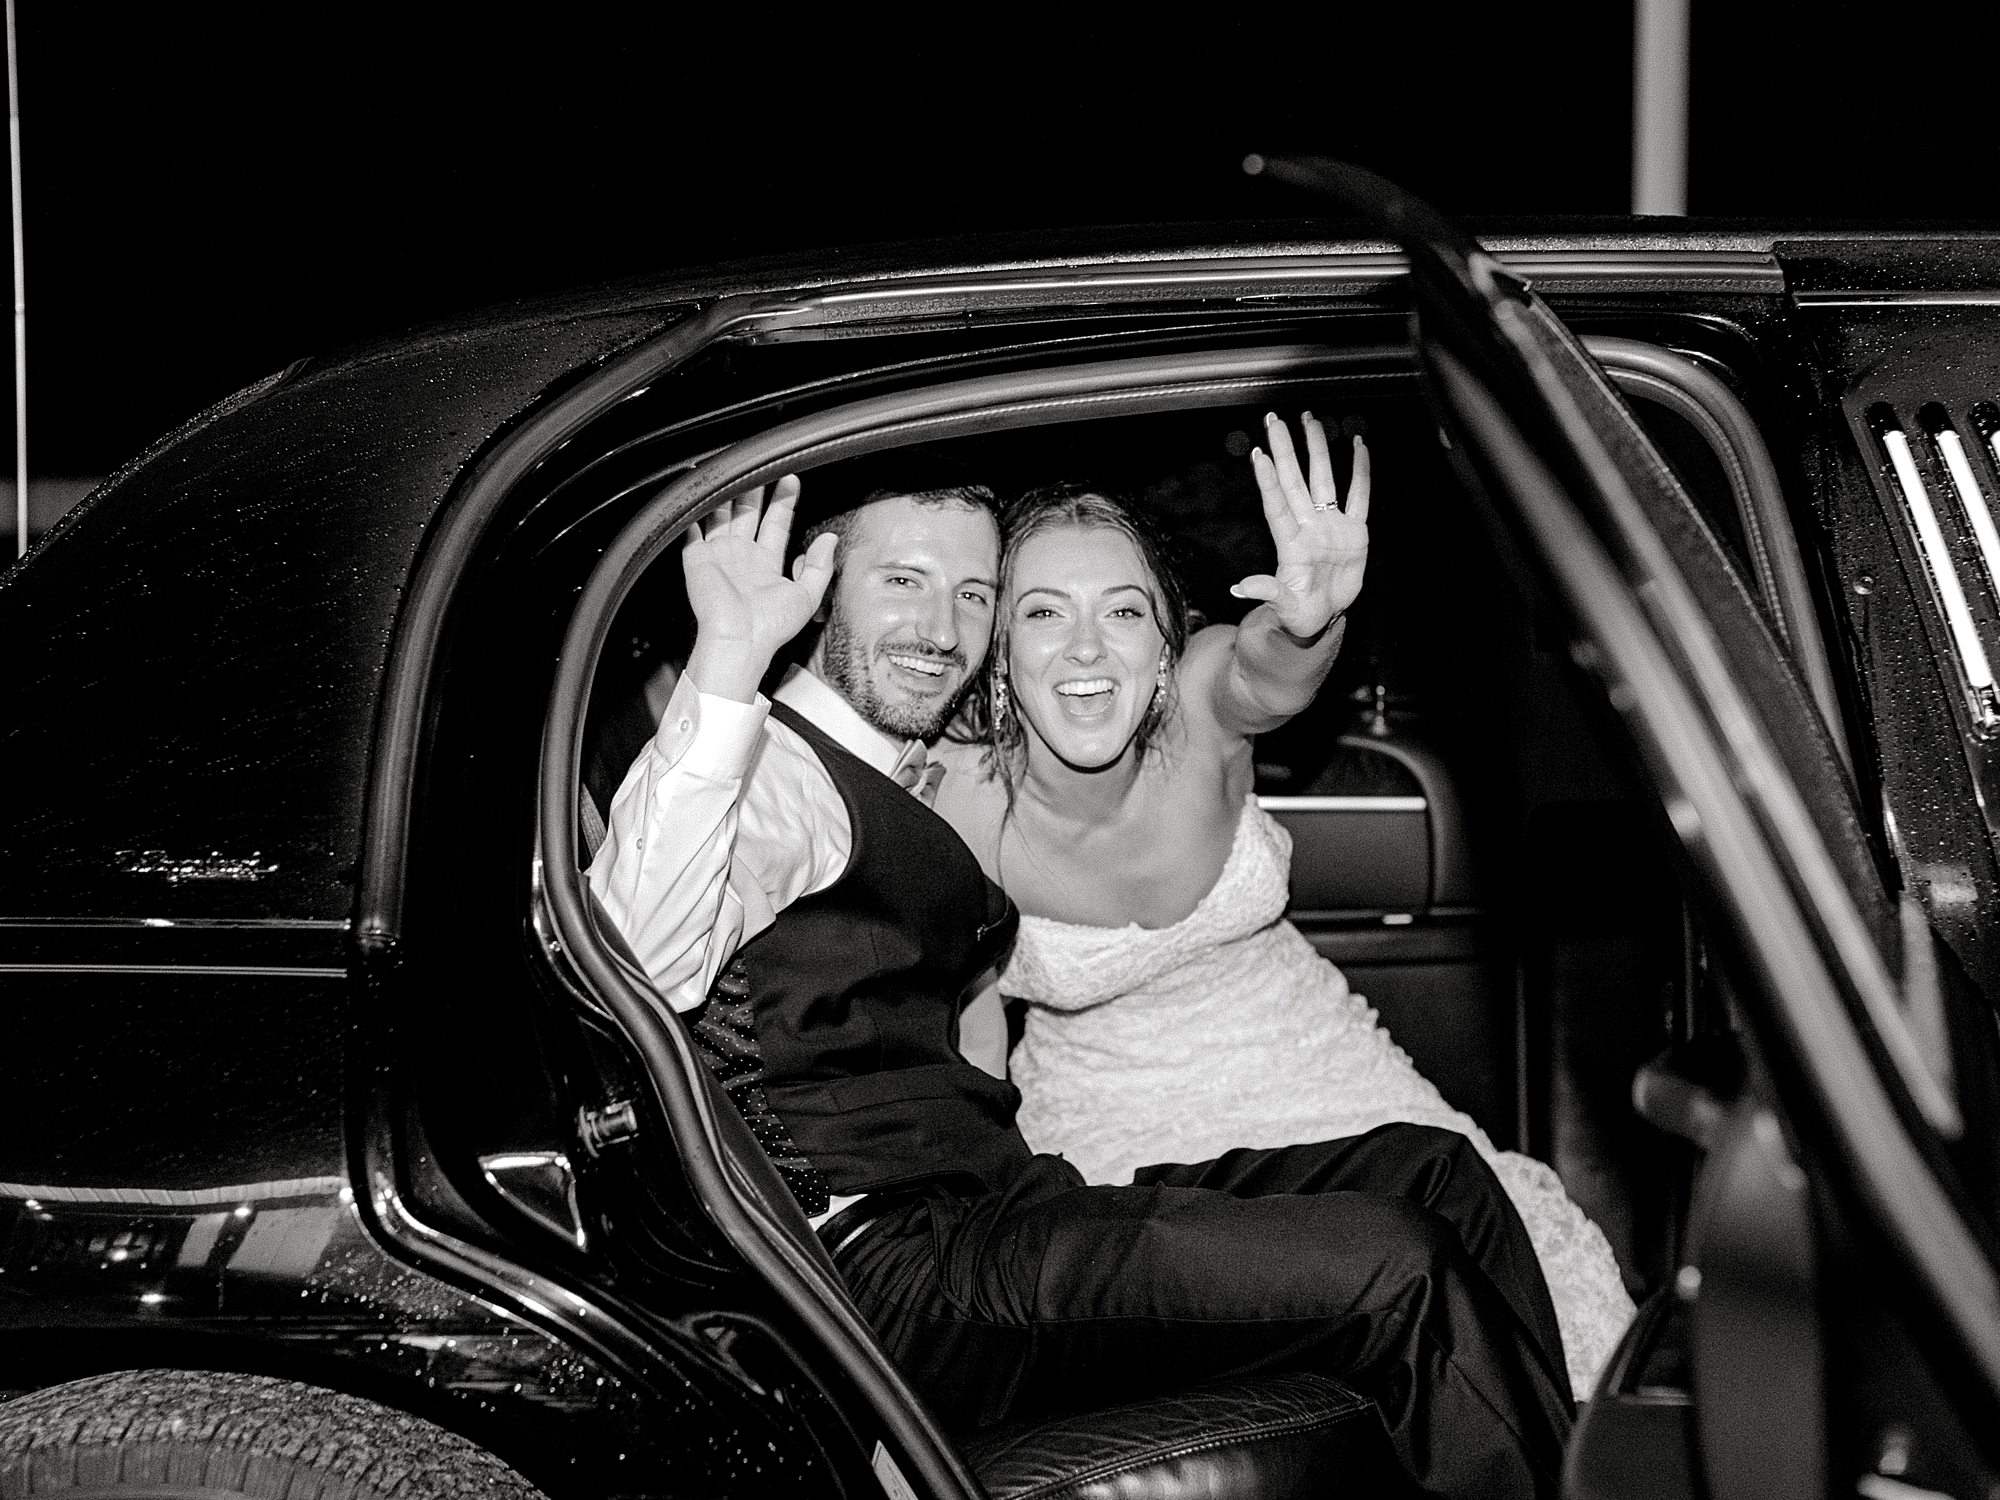 Bride and groom waving goodbye in limo.